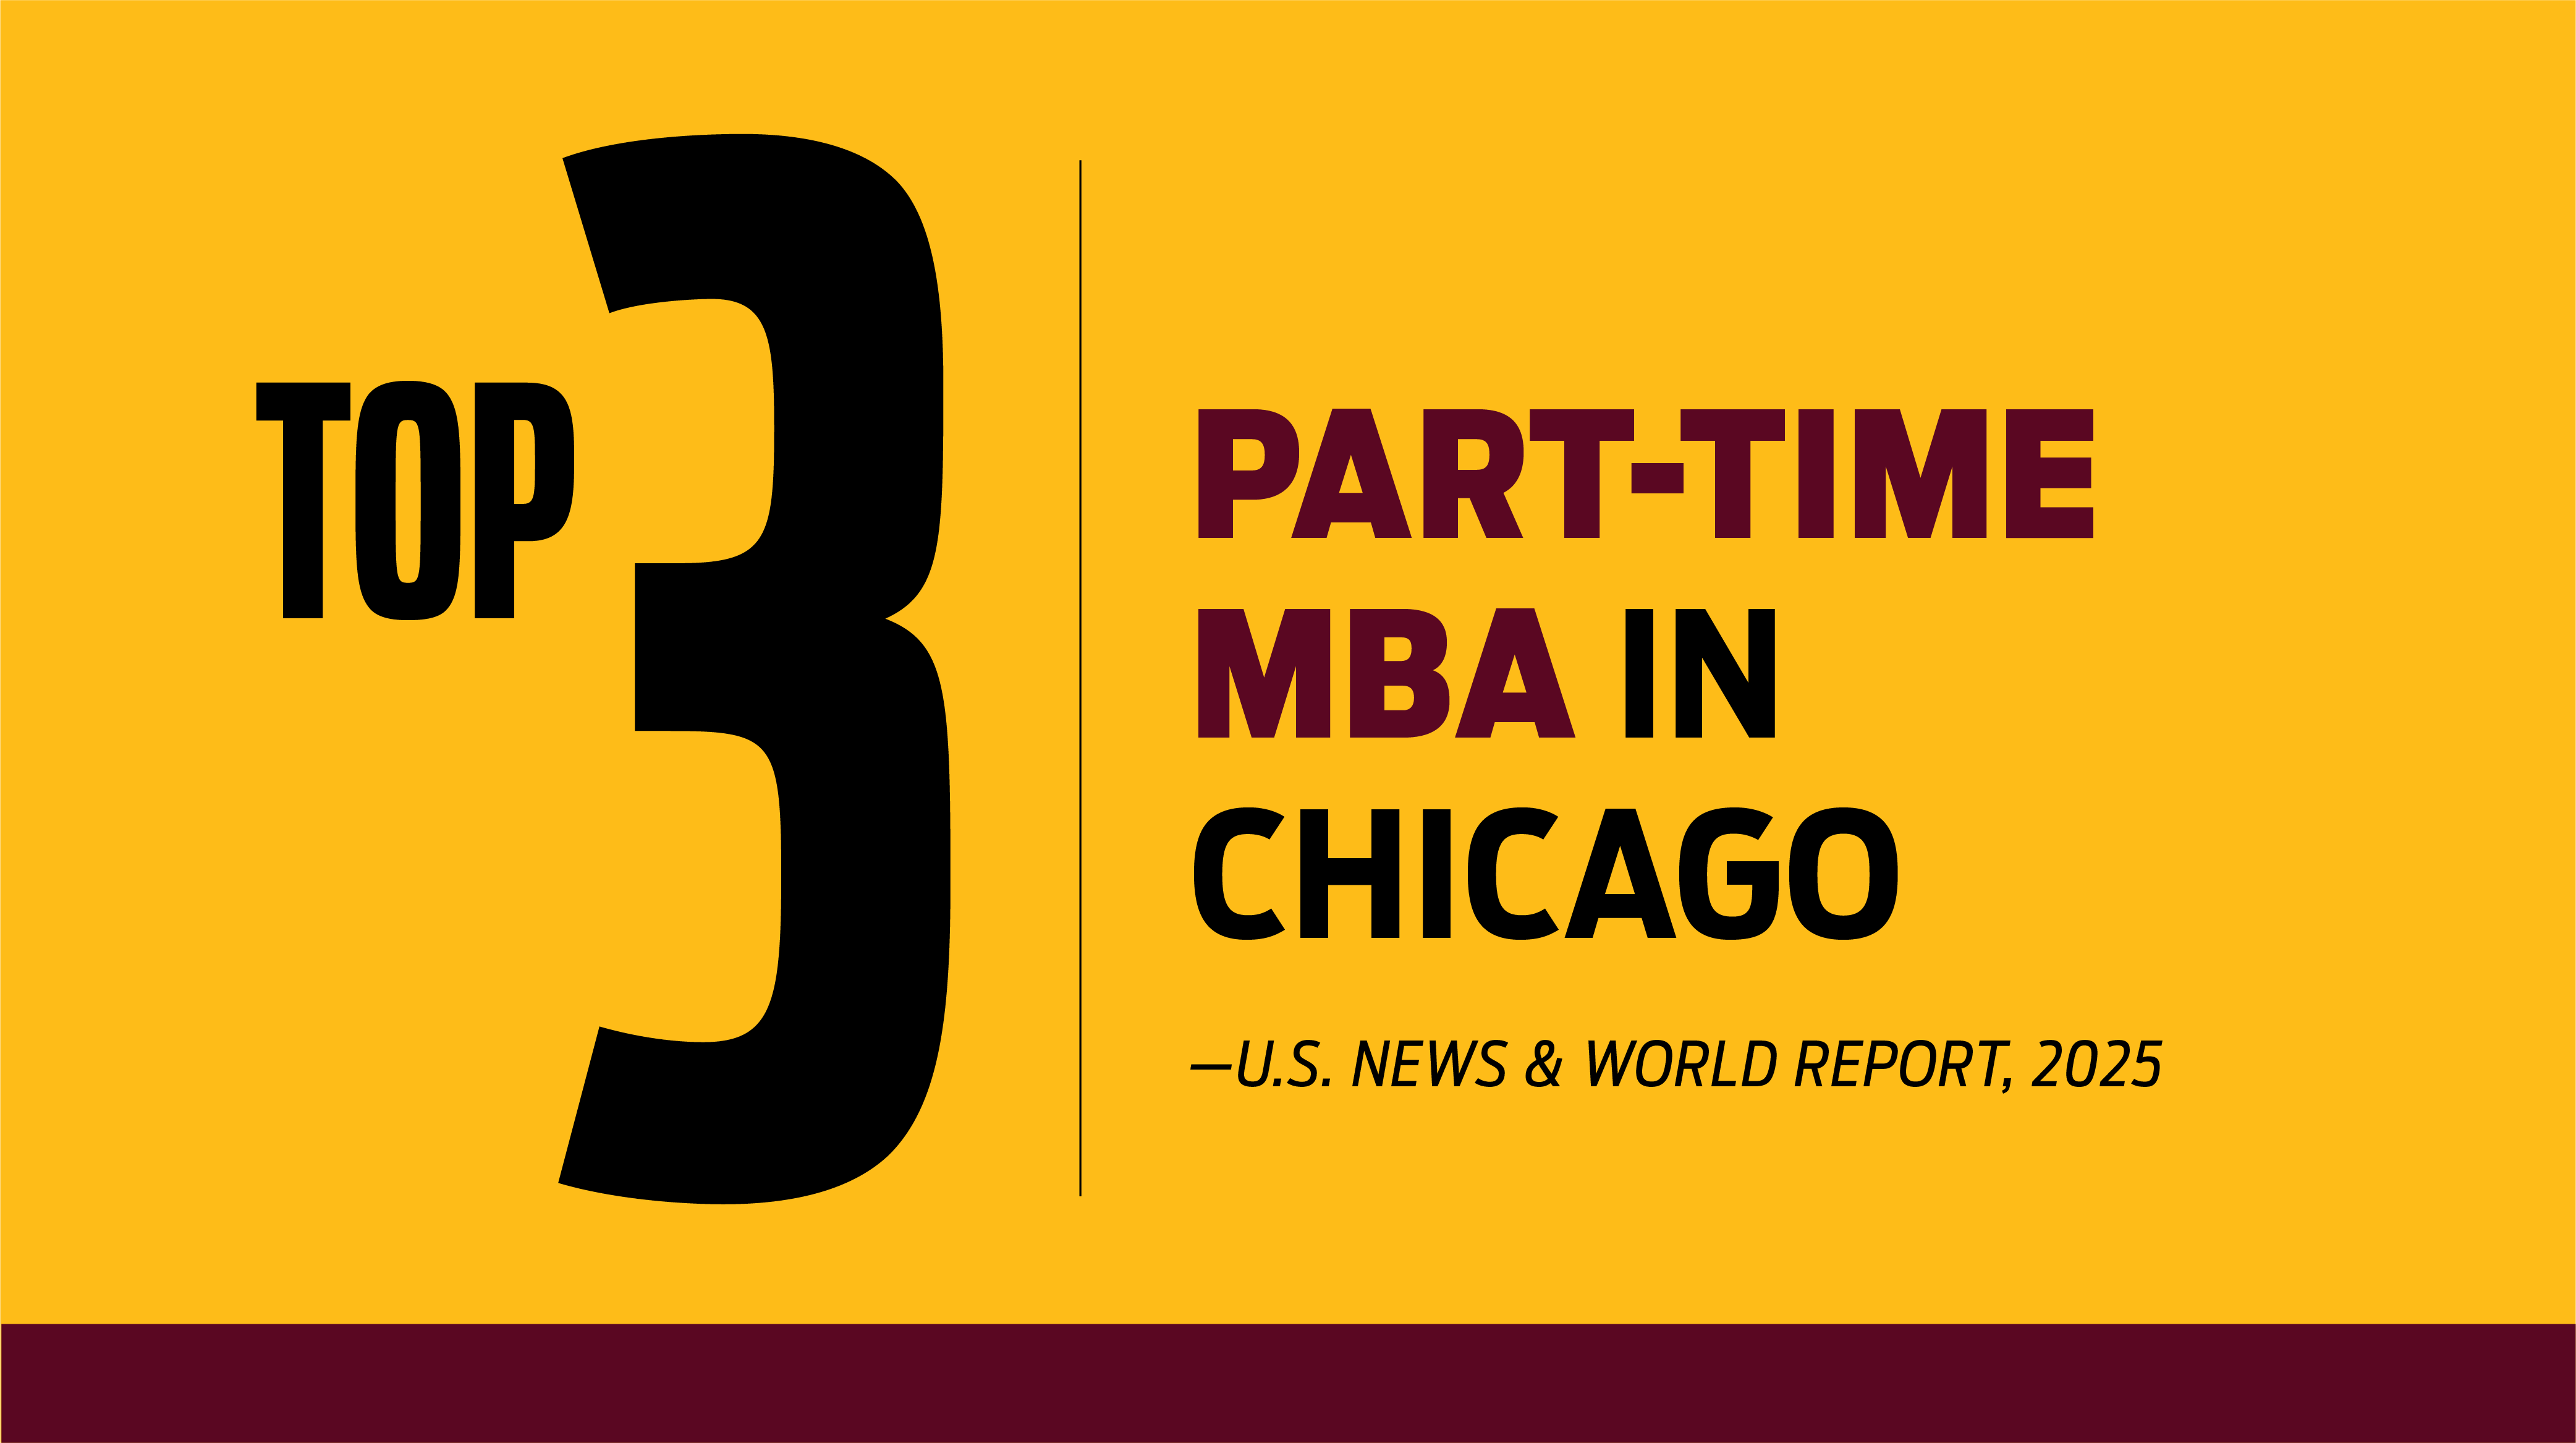 Top 3 Part-Time MBA in Chicago